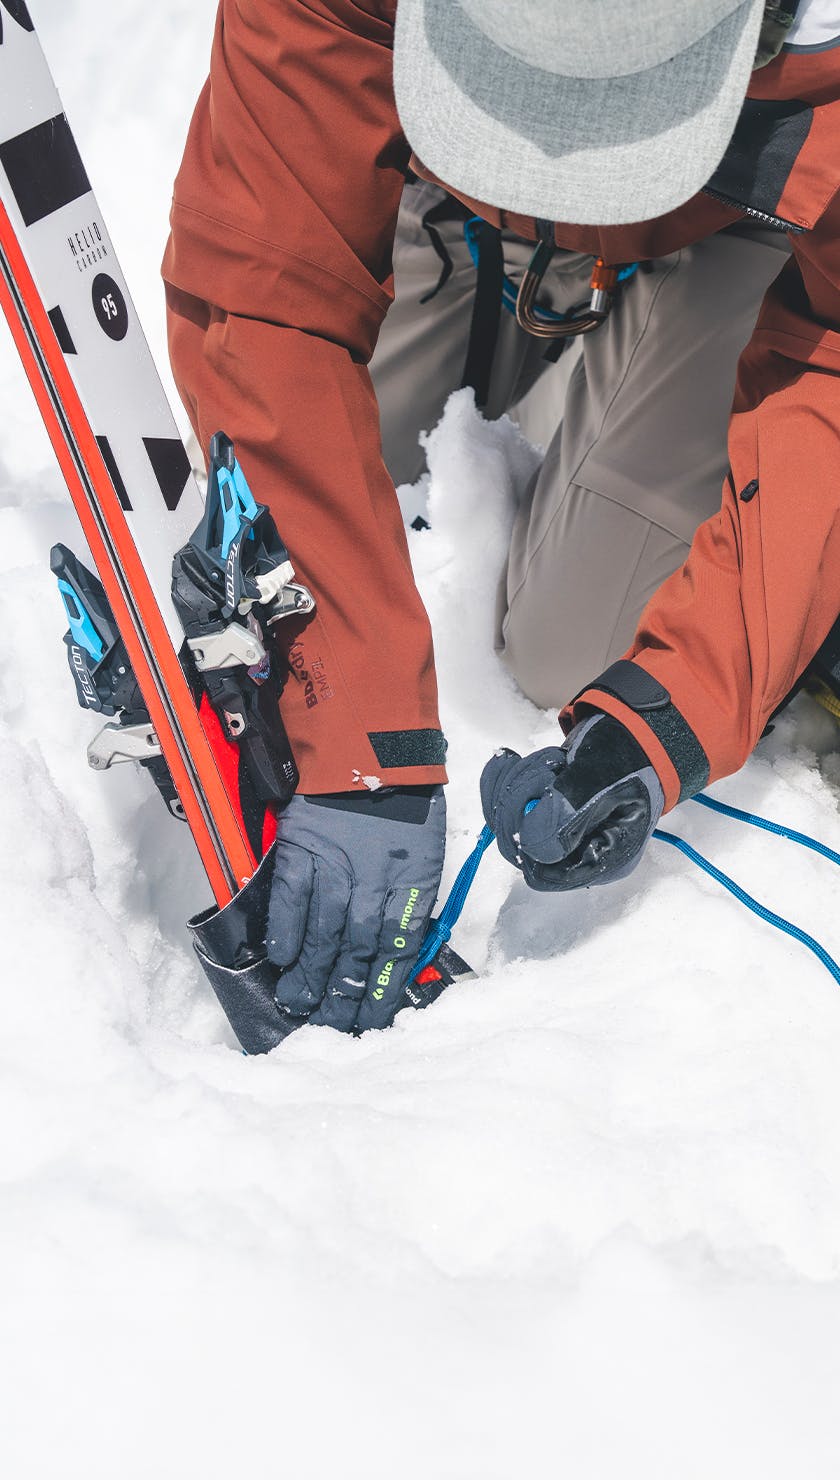 A man secures a snow anchor in snow